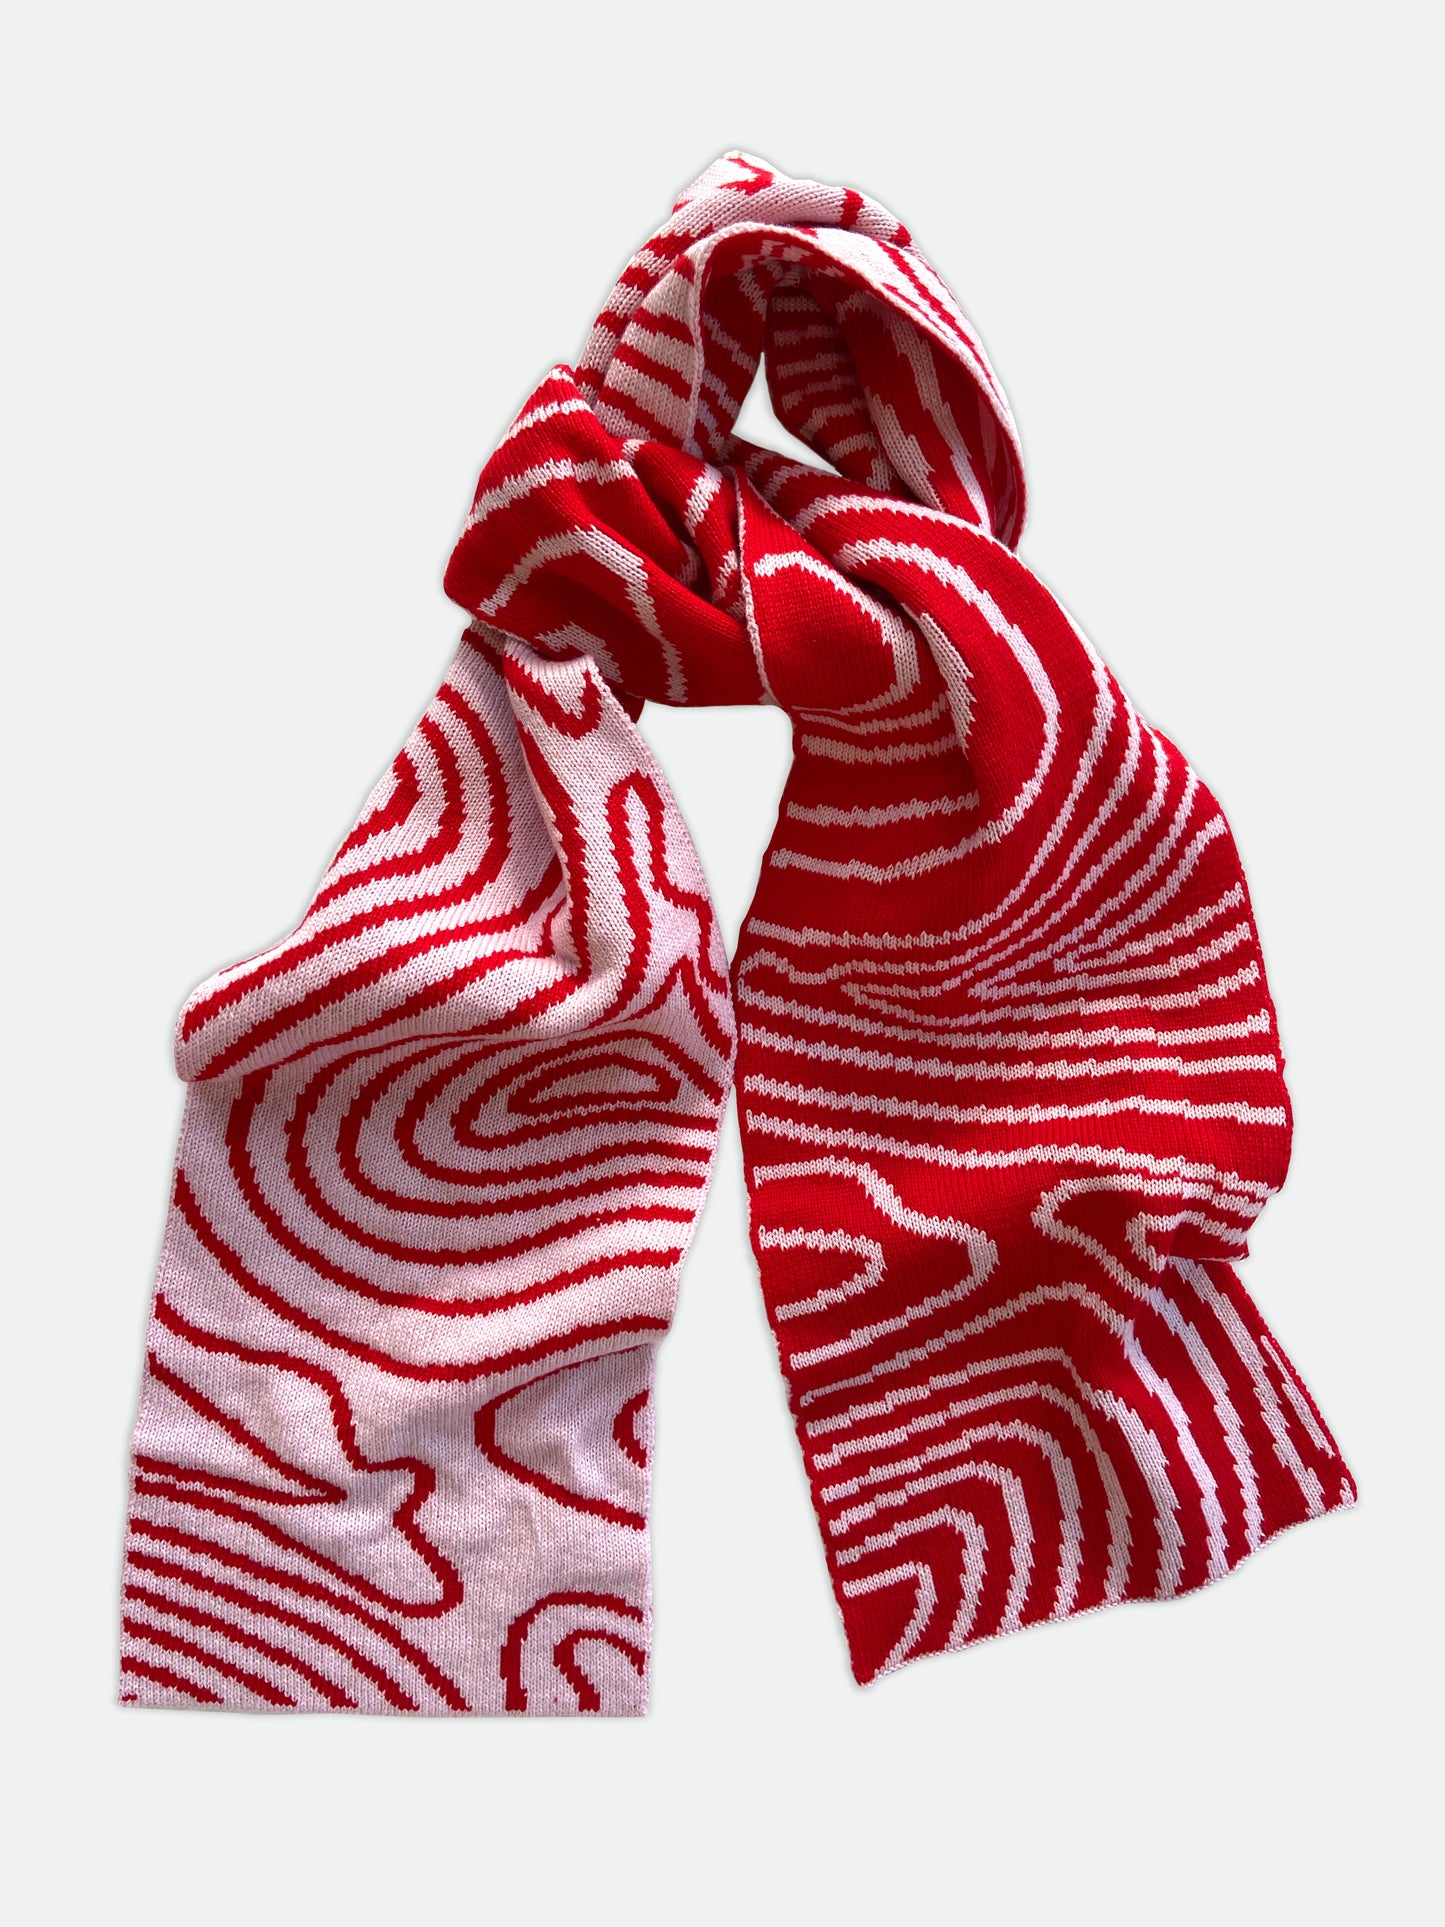 Swirly Stripe Knitted Scarf in Pink And Red